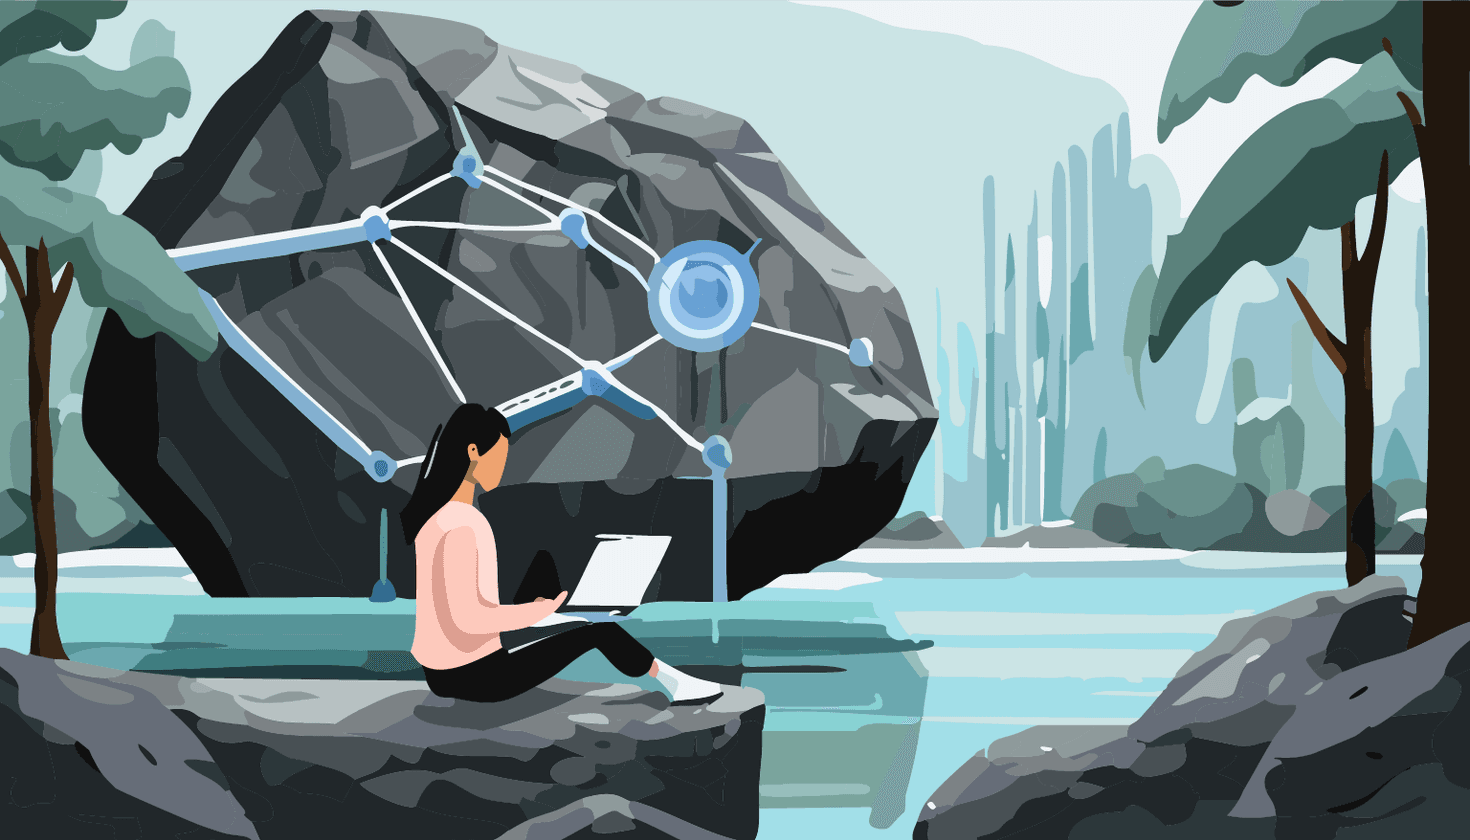 Engineer working on a laptop outdoors, with a large rock networked by nodes. Ideal for content on interconnected systems, network engineering, and remote work.